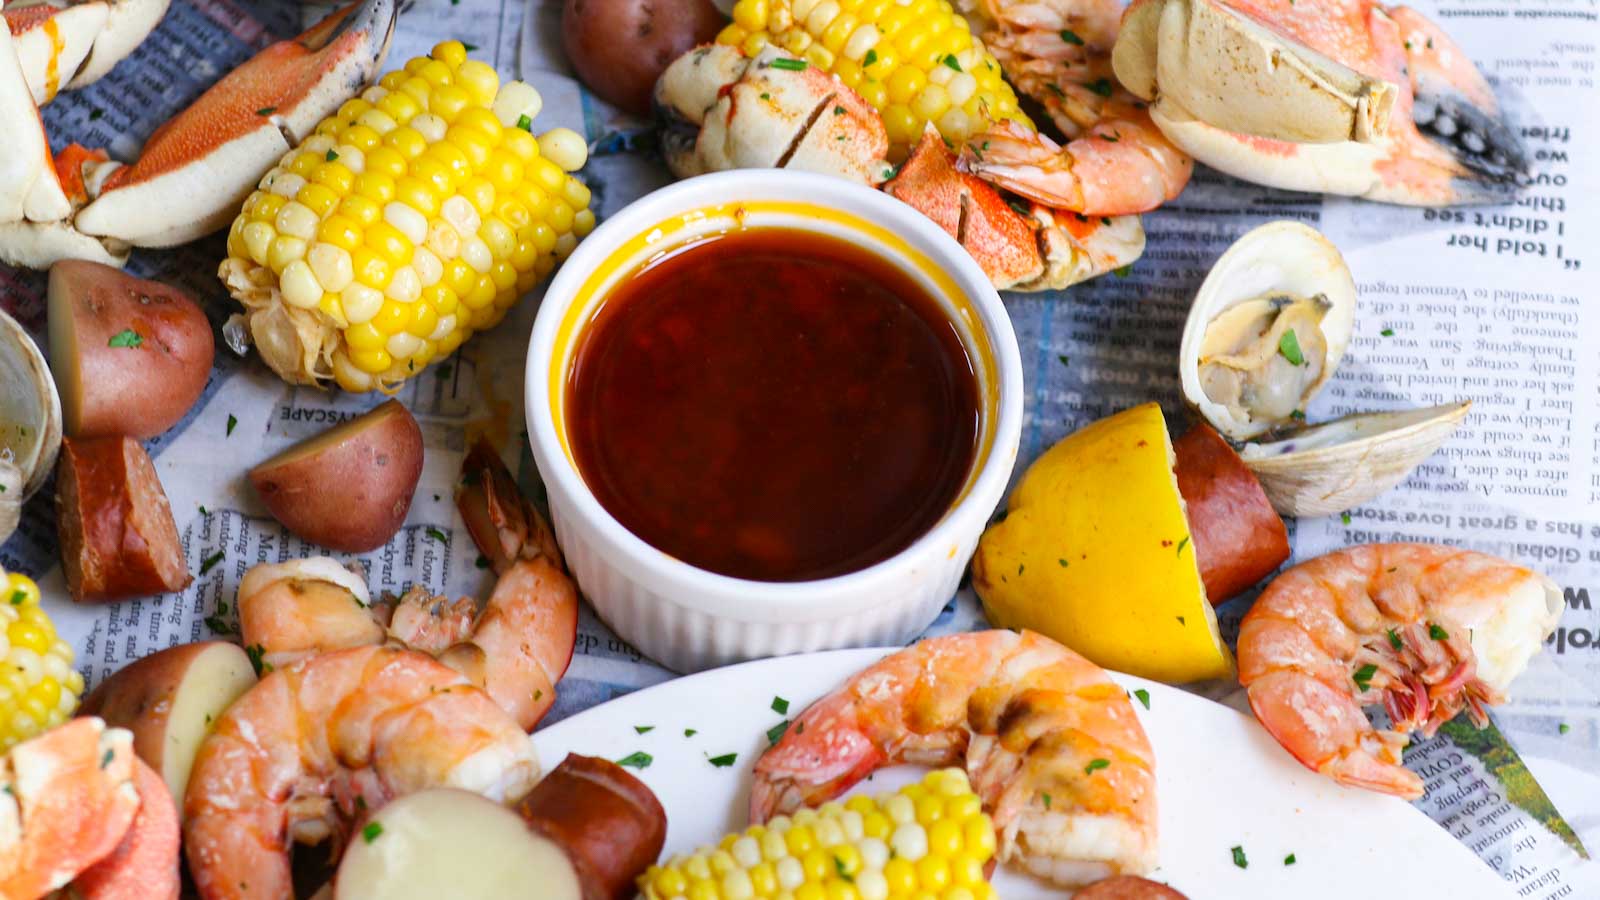 The Most Delicious Garlic Butter Seafood Boil - Razzle Dazzle Life